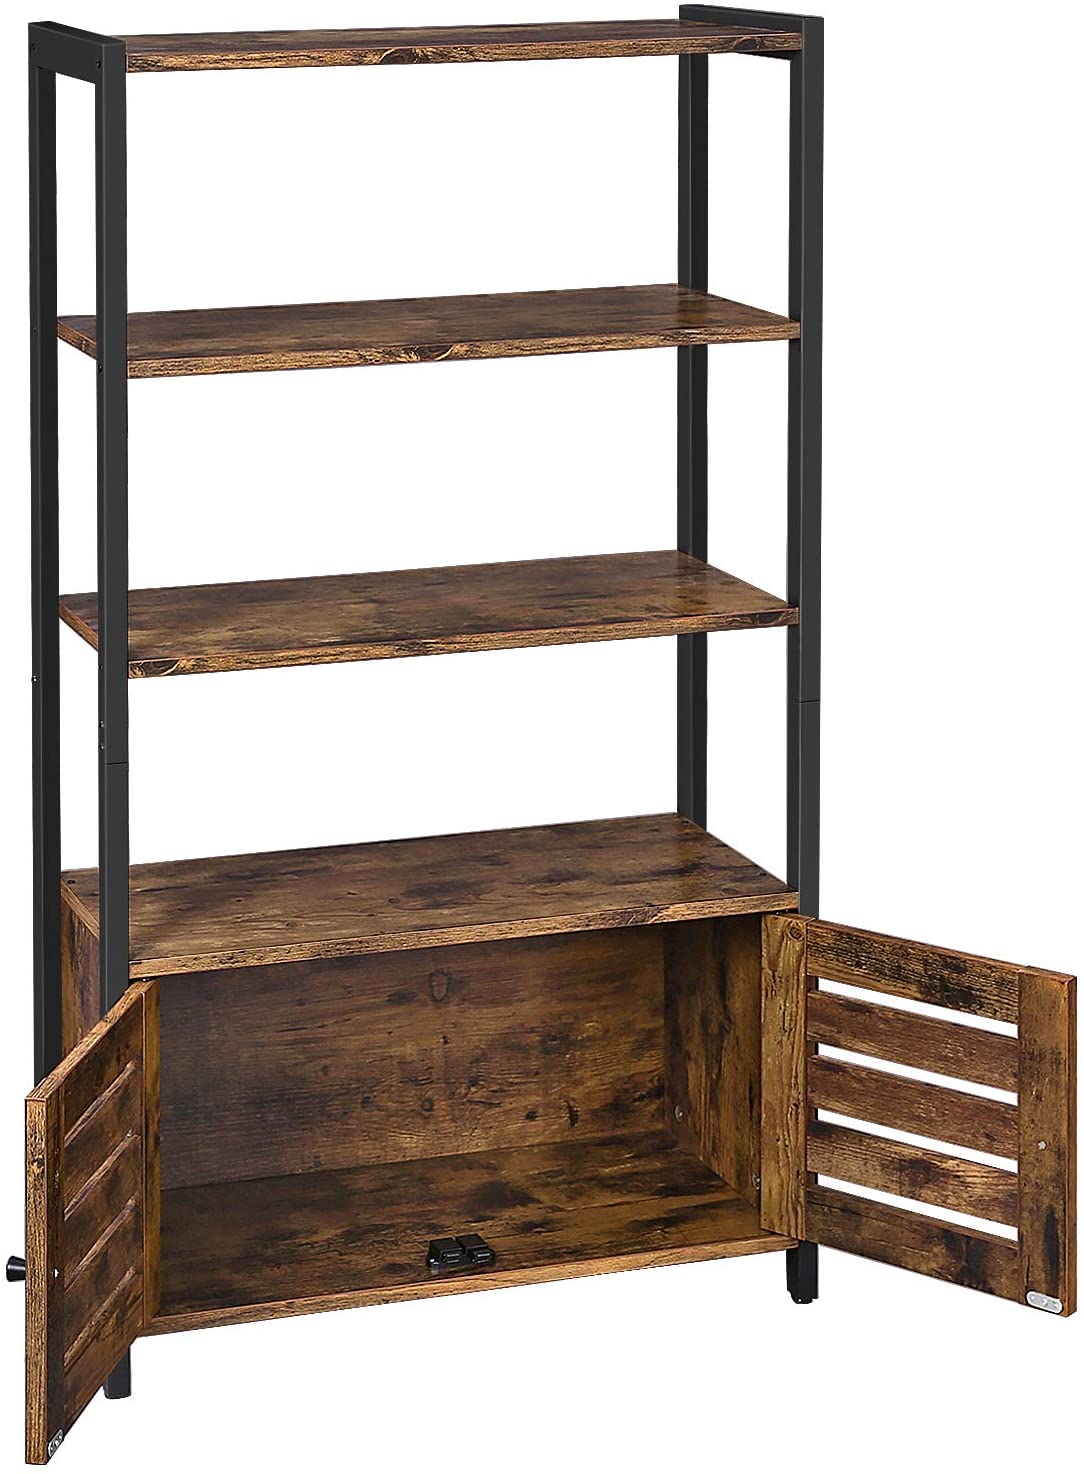 Floor-Standing Storage Cabinet And Cupboard With 2 Doors And 3 Shelves, Rustic Brown